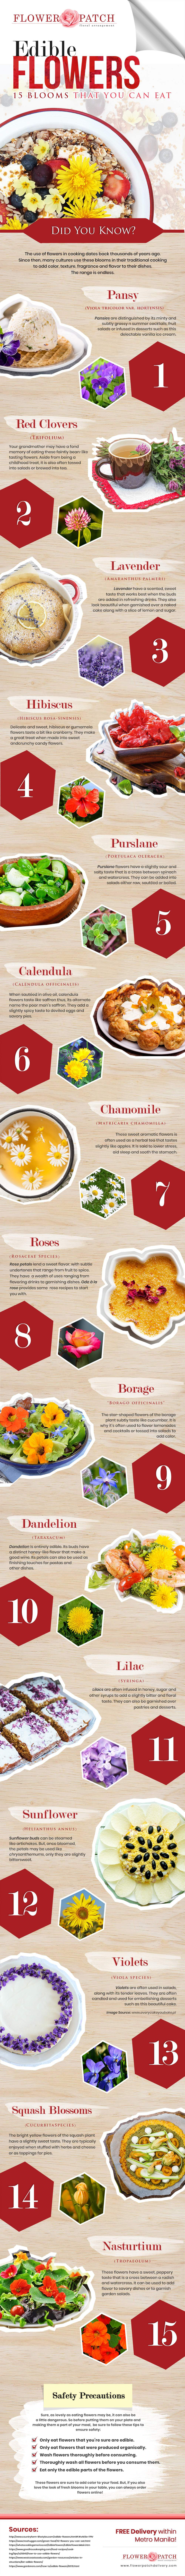 15 Blooms that You Can Eat